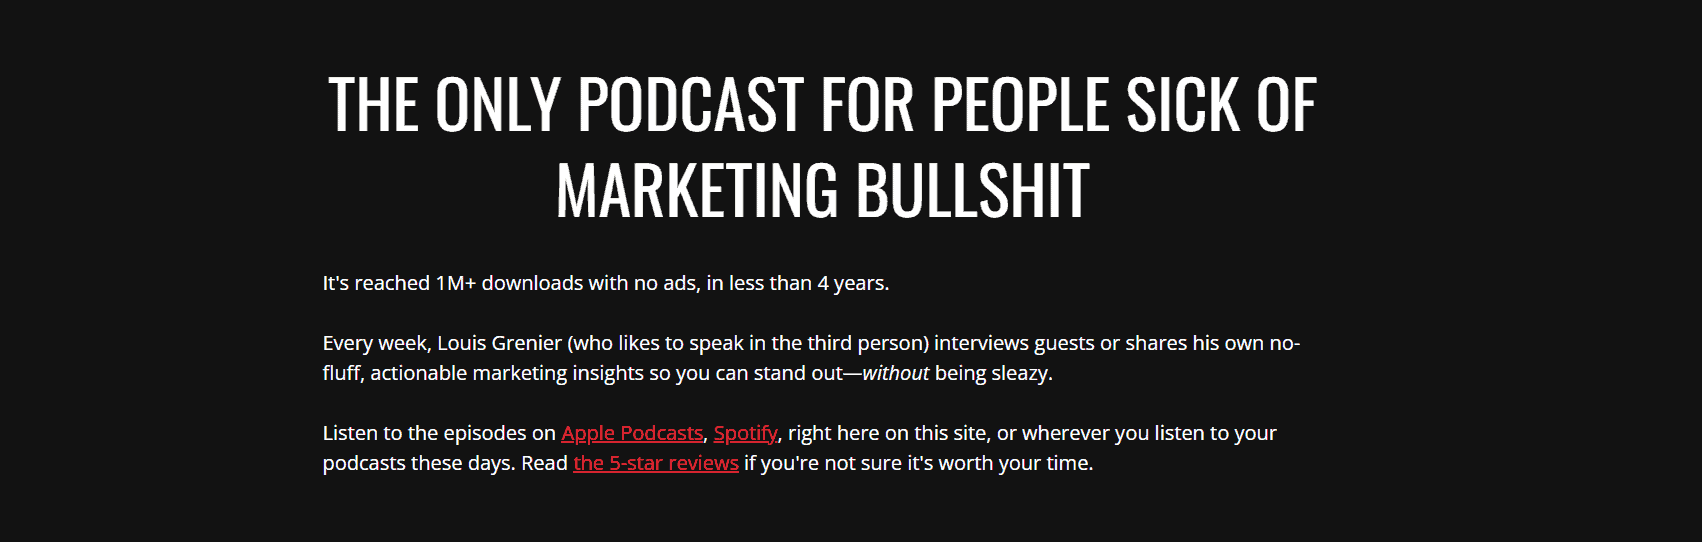 Everyone hates marketers podcast